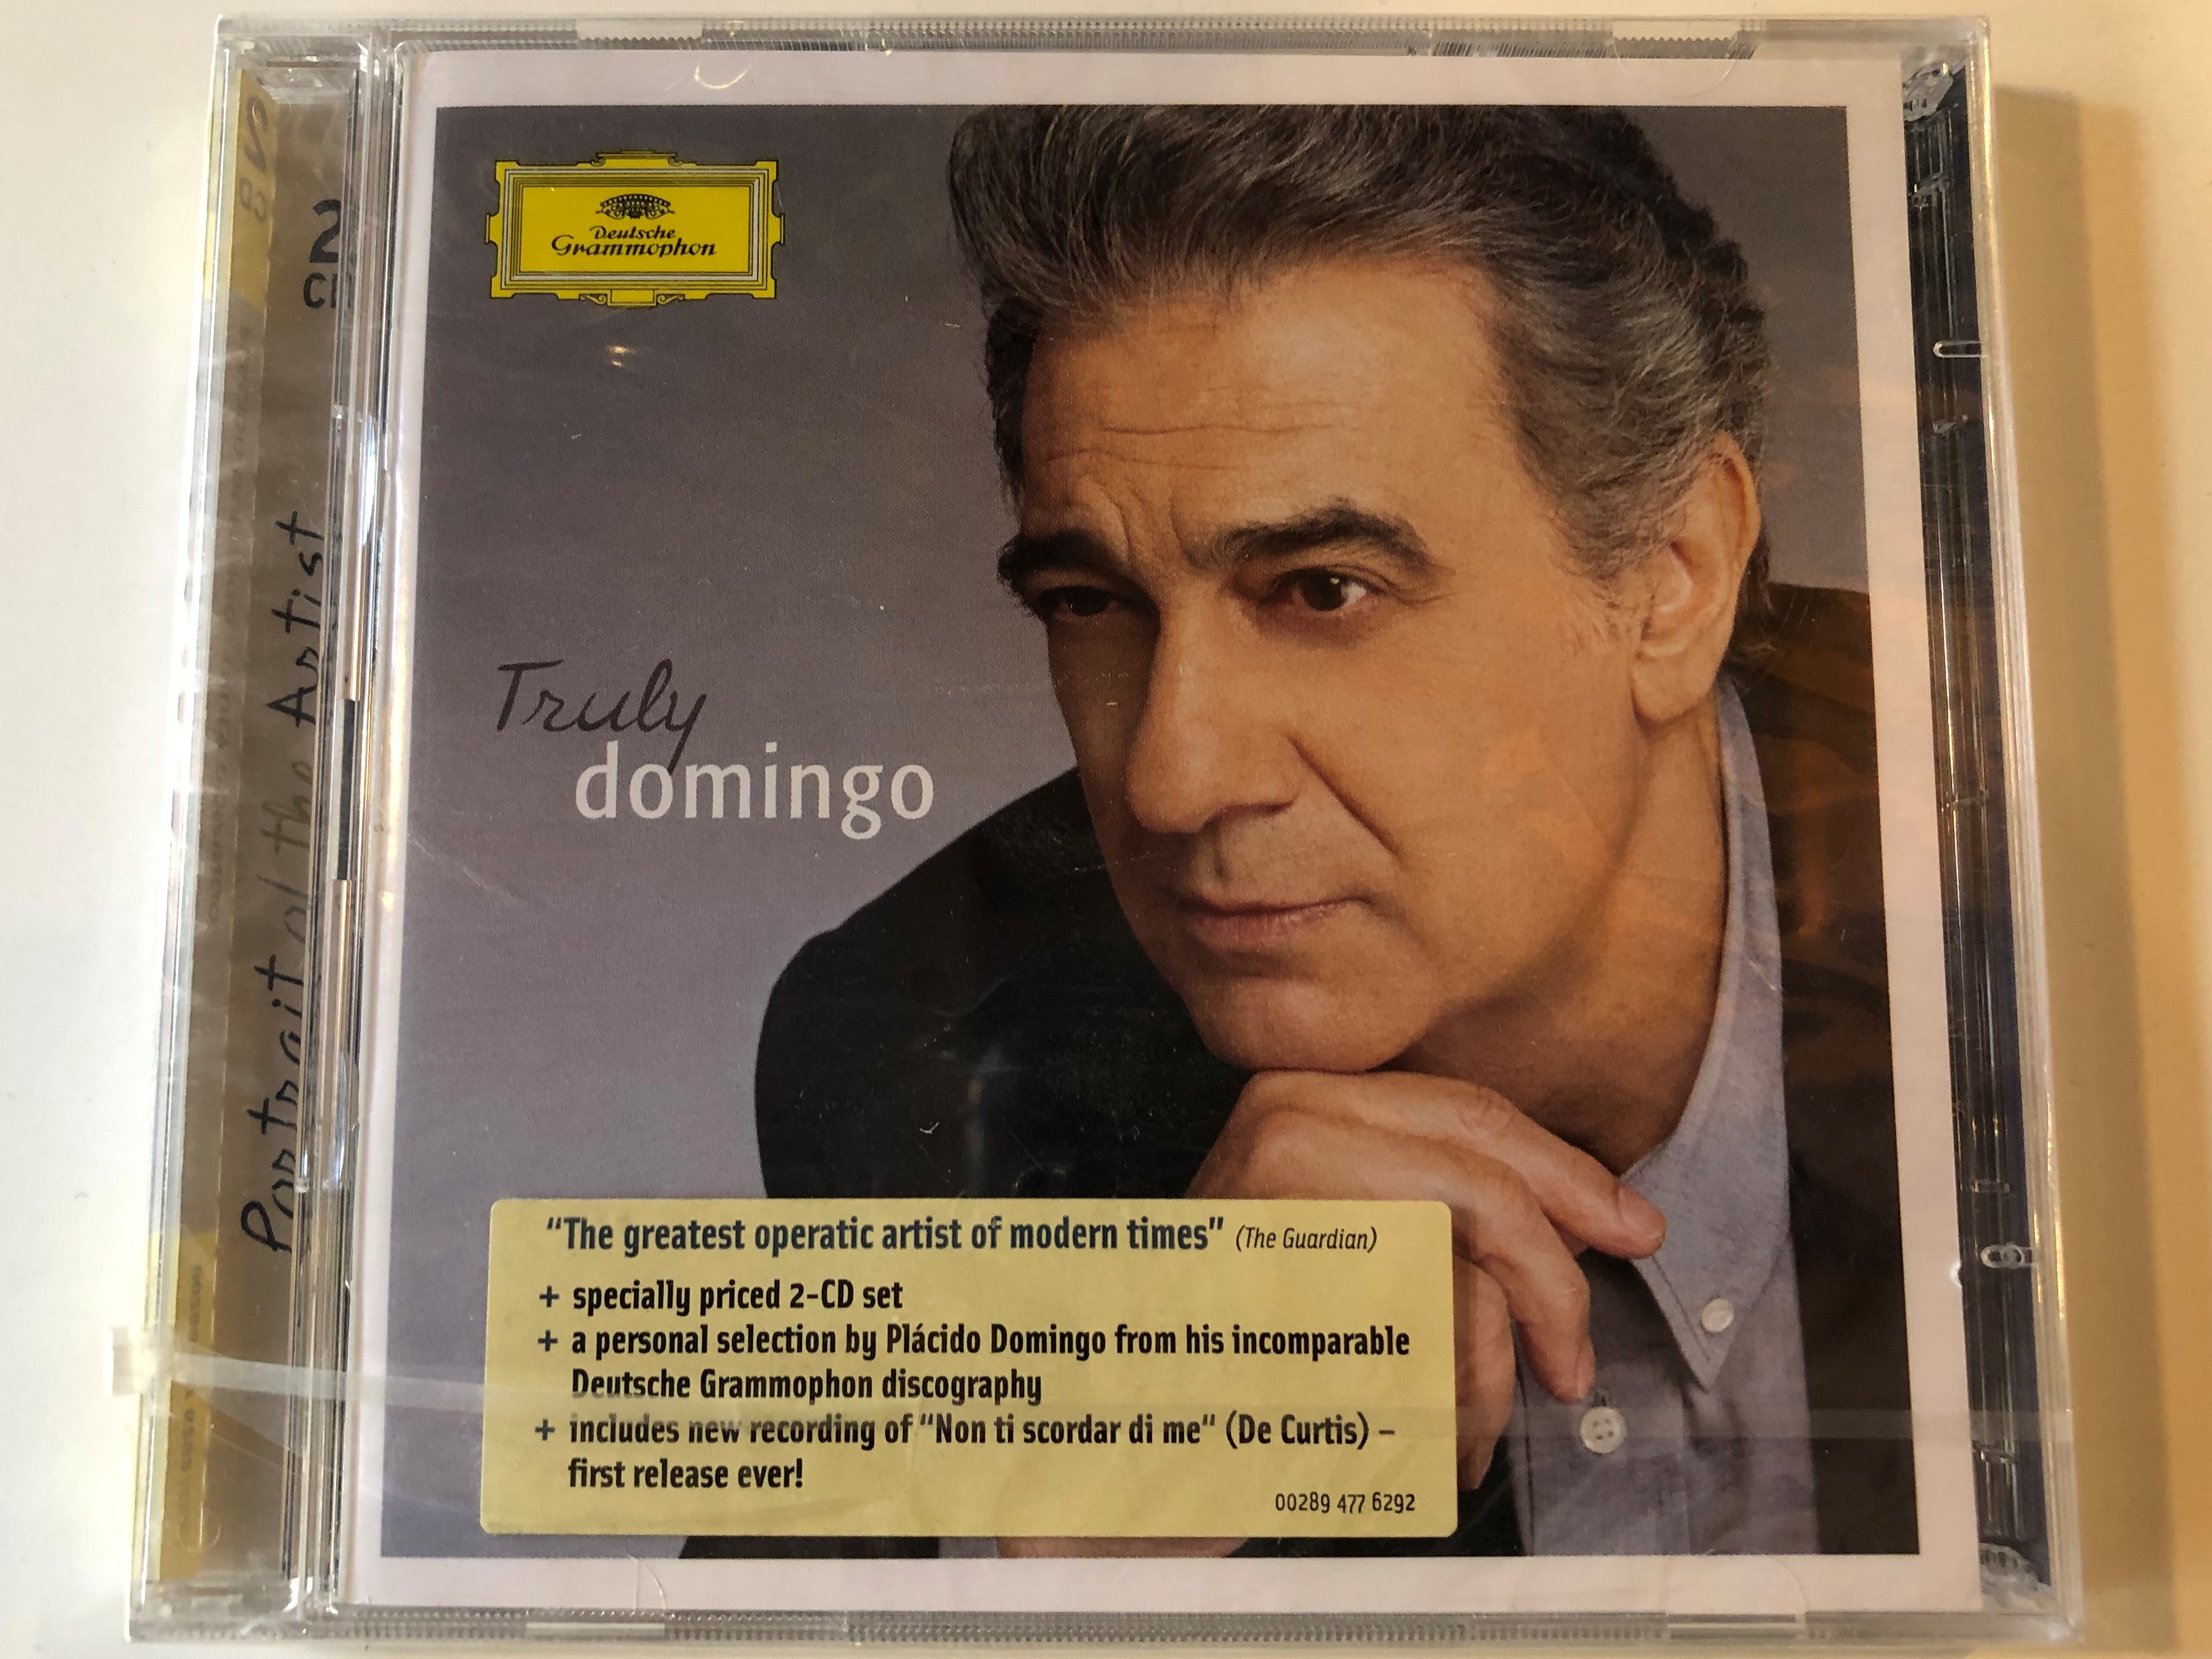 truly-domingo-portrait-of-the-artist-specially-priced-2-cd-set-includes-new-recording-of-non-ti-scordar-di-me-de-curtis-first-release-ever-deutsche-grammophon-2x-audio-cd-2006-1-.jpg